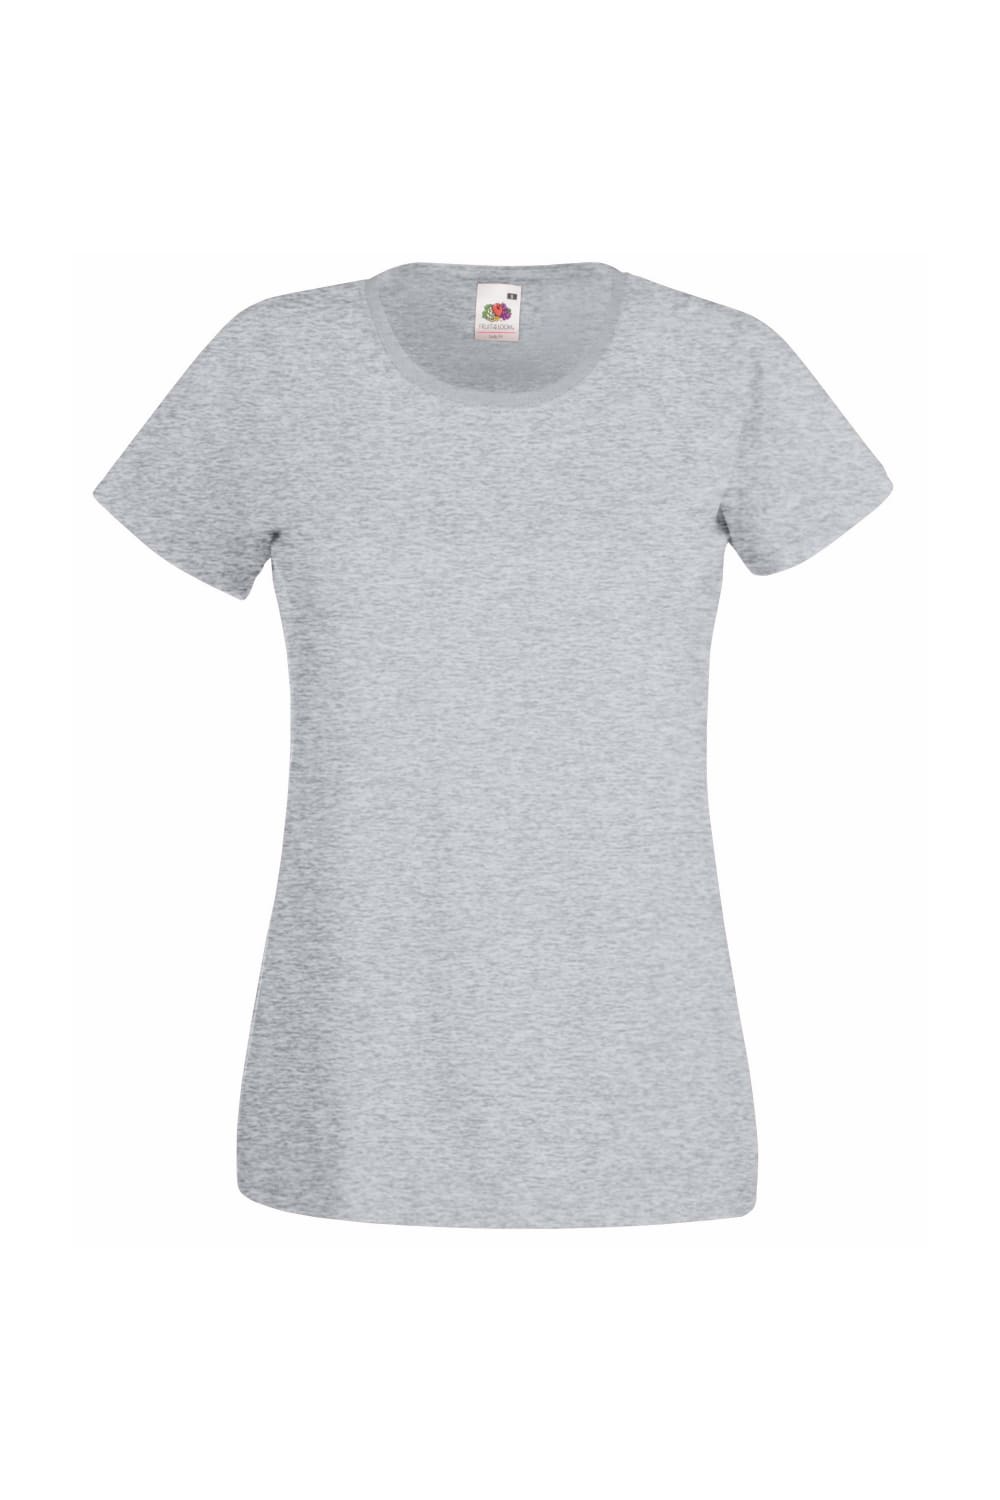 Fruit Of The Loom Ladies/Womens Lady-Fit Valueweight Short Sleeve T-Shirt (Pack (Heather Gray)